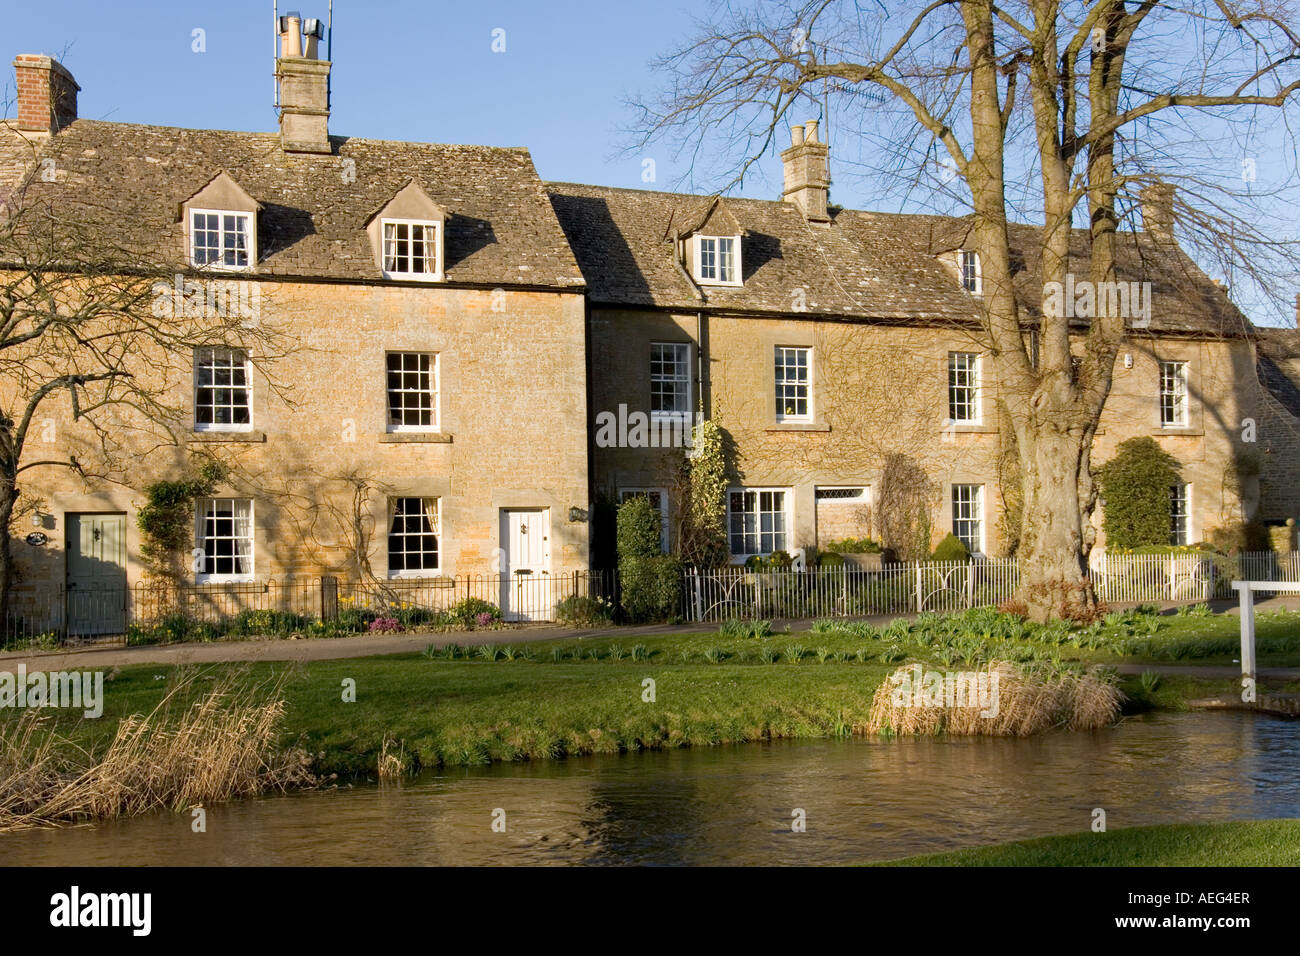 Idilliaco cotswold cottages dal fiume occhio, Lower Slaughter, Cotswolds, Gloucestershire, England, Regno Unito Foto Stock